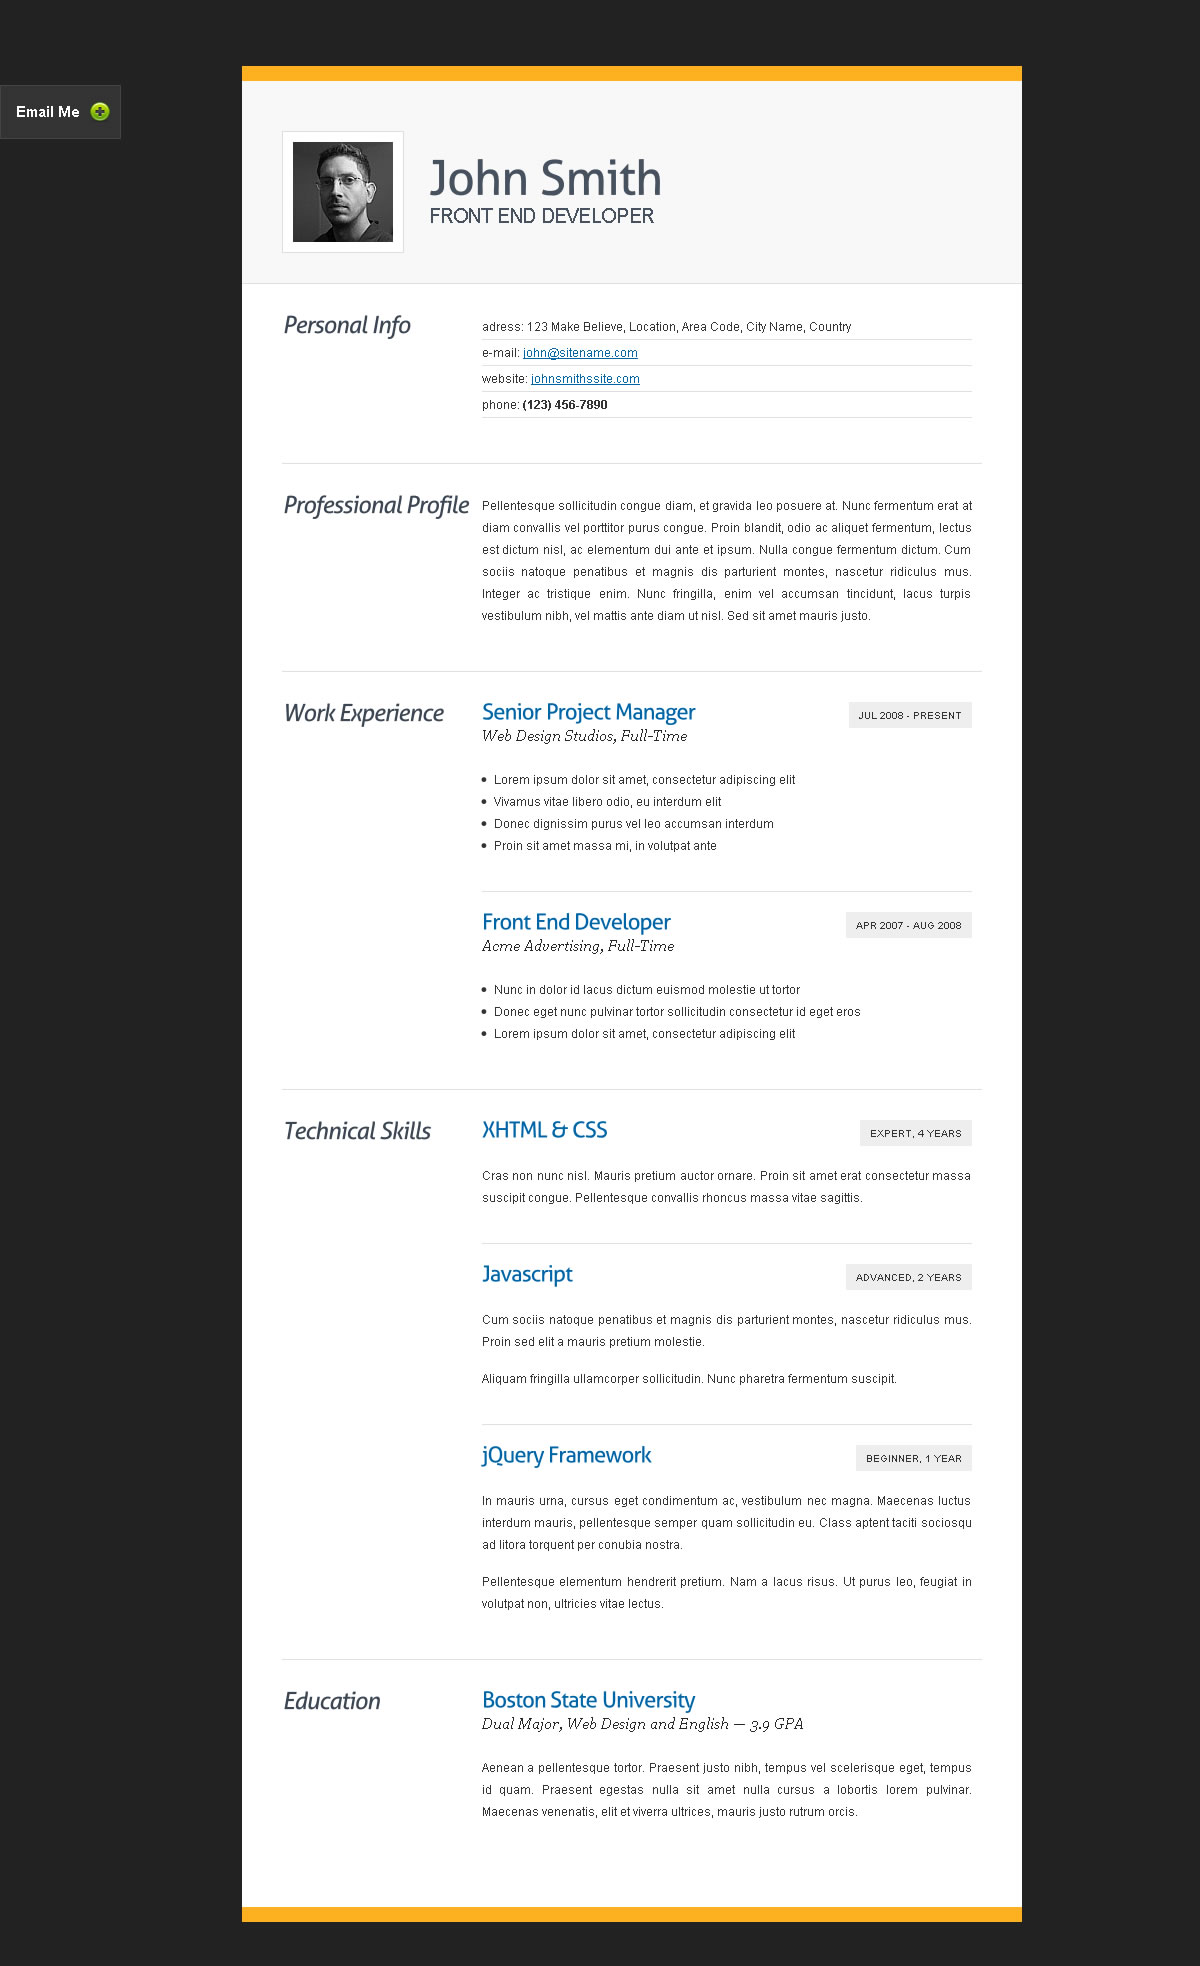 Curriculum Vitae Format Rich Image And Wallpaper